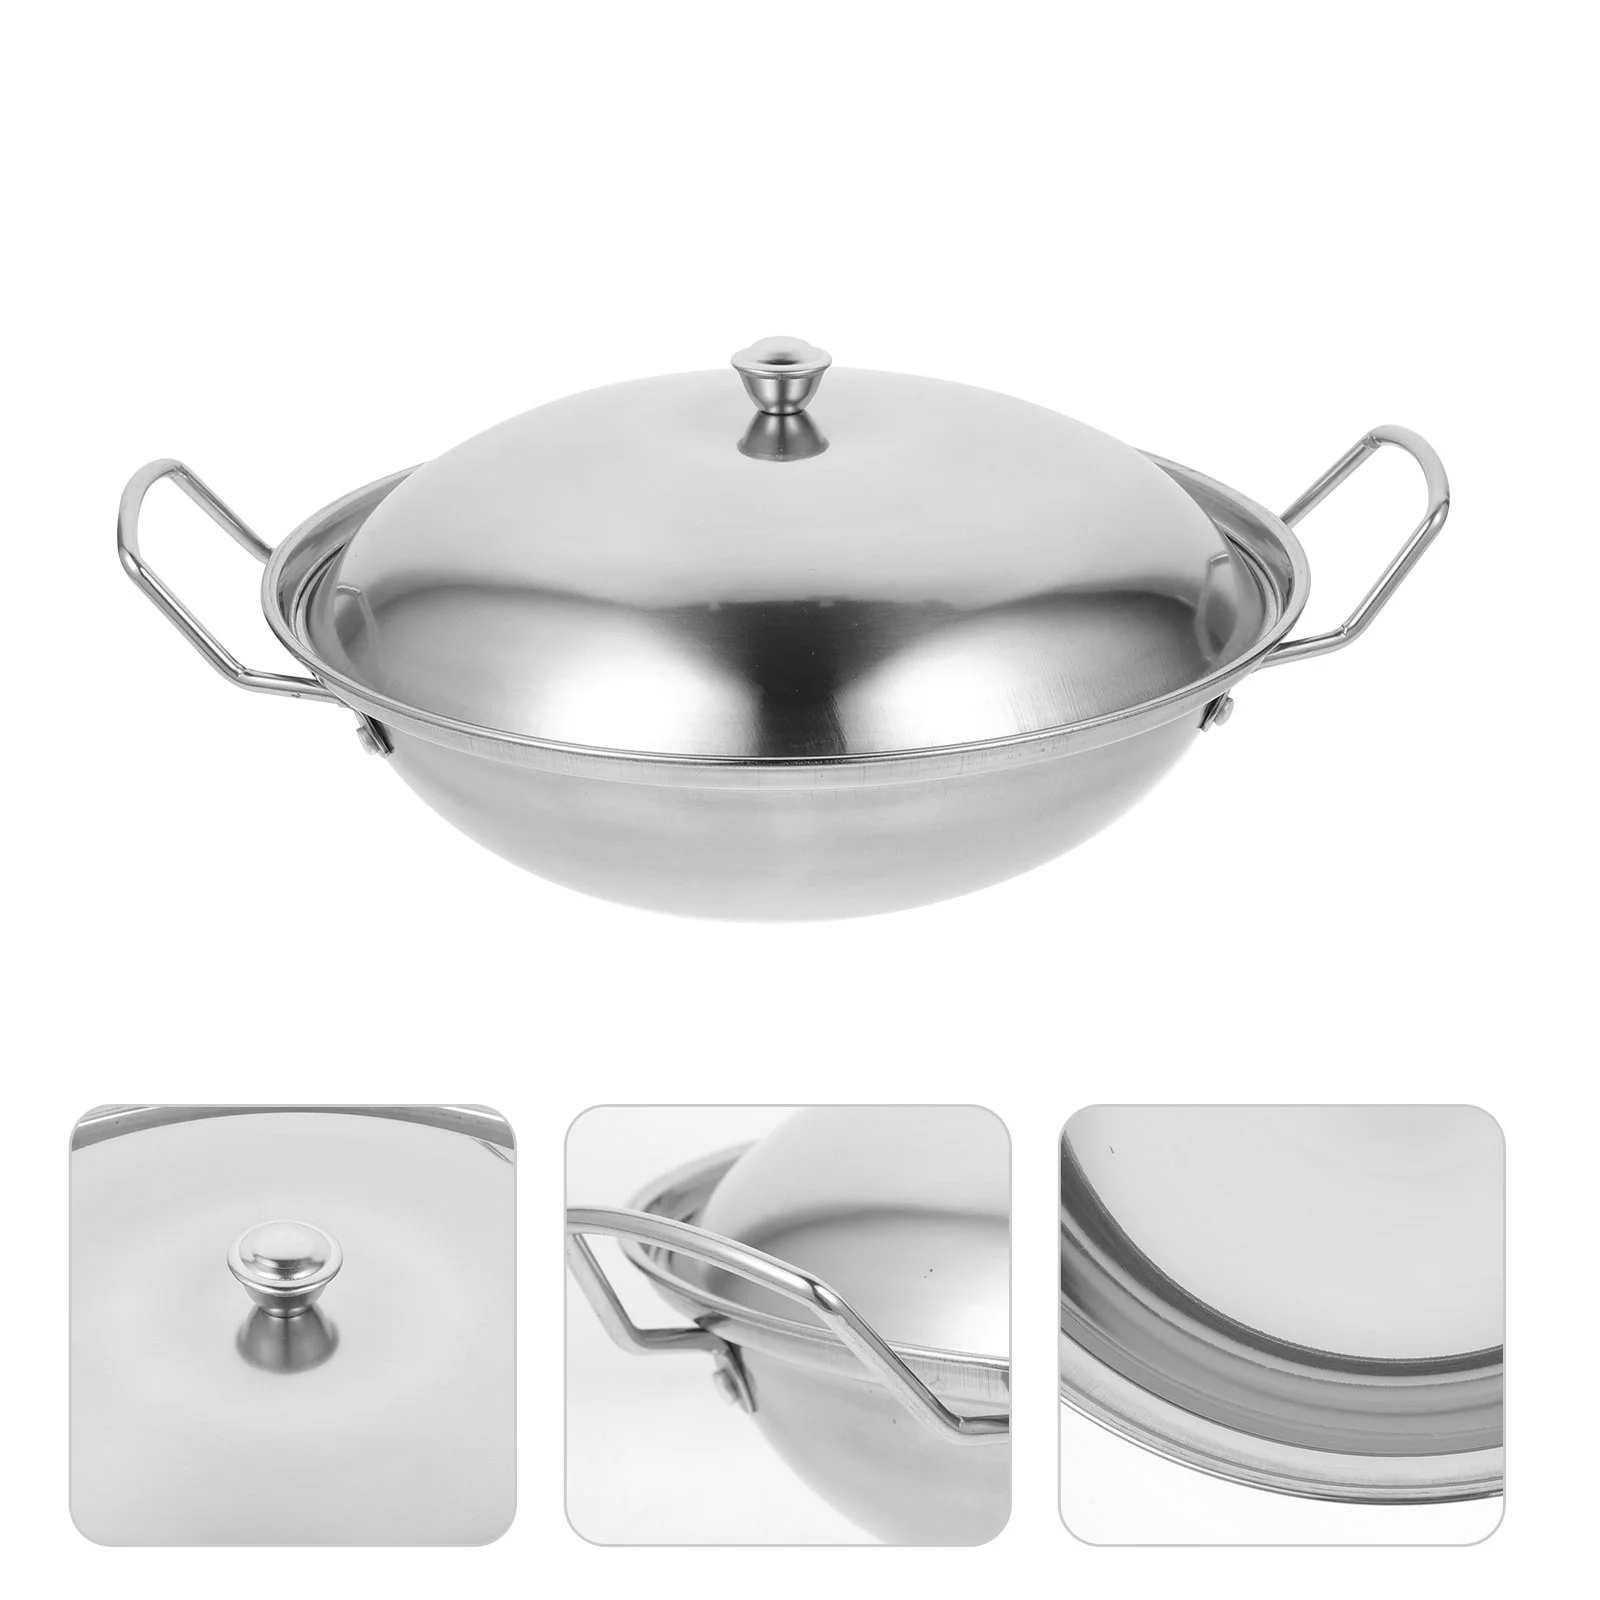 

Stainless Steel Wok Woks & Stir-fry Pans Frying Saucepan Chinese Iron Pot Cast Griddle Stove Lid